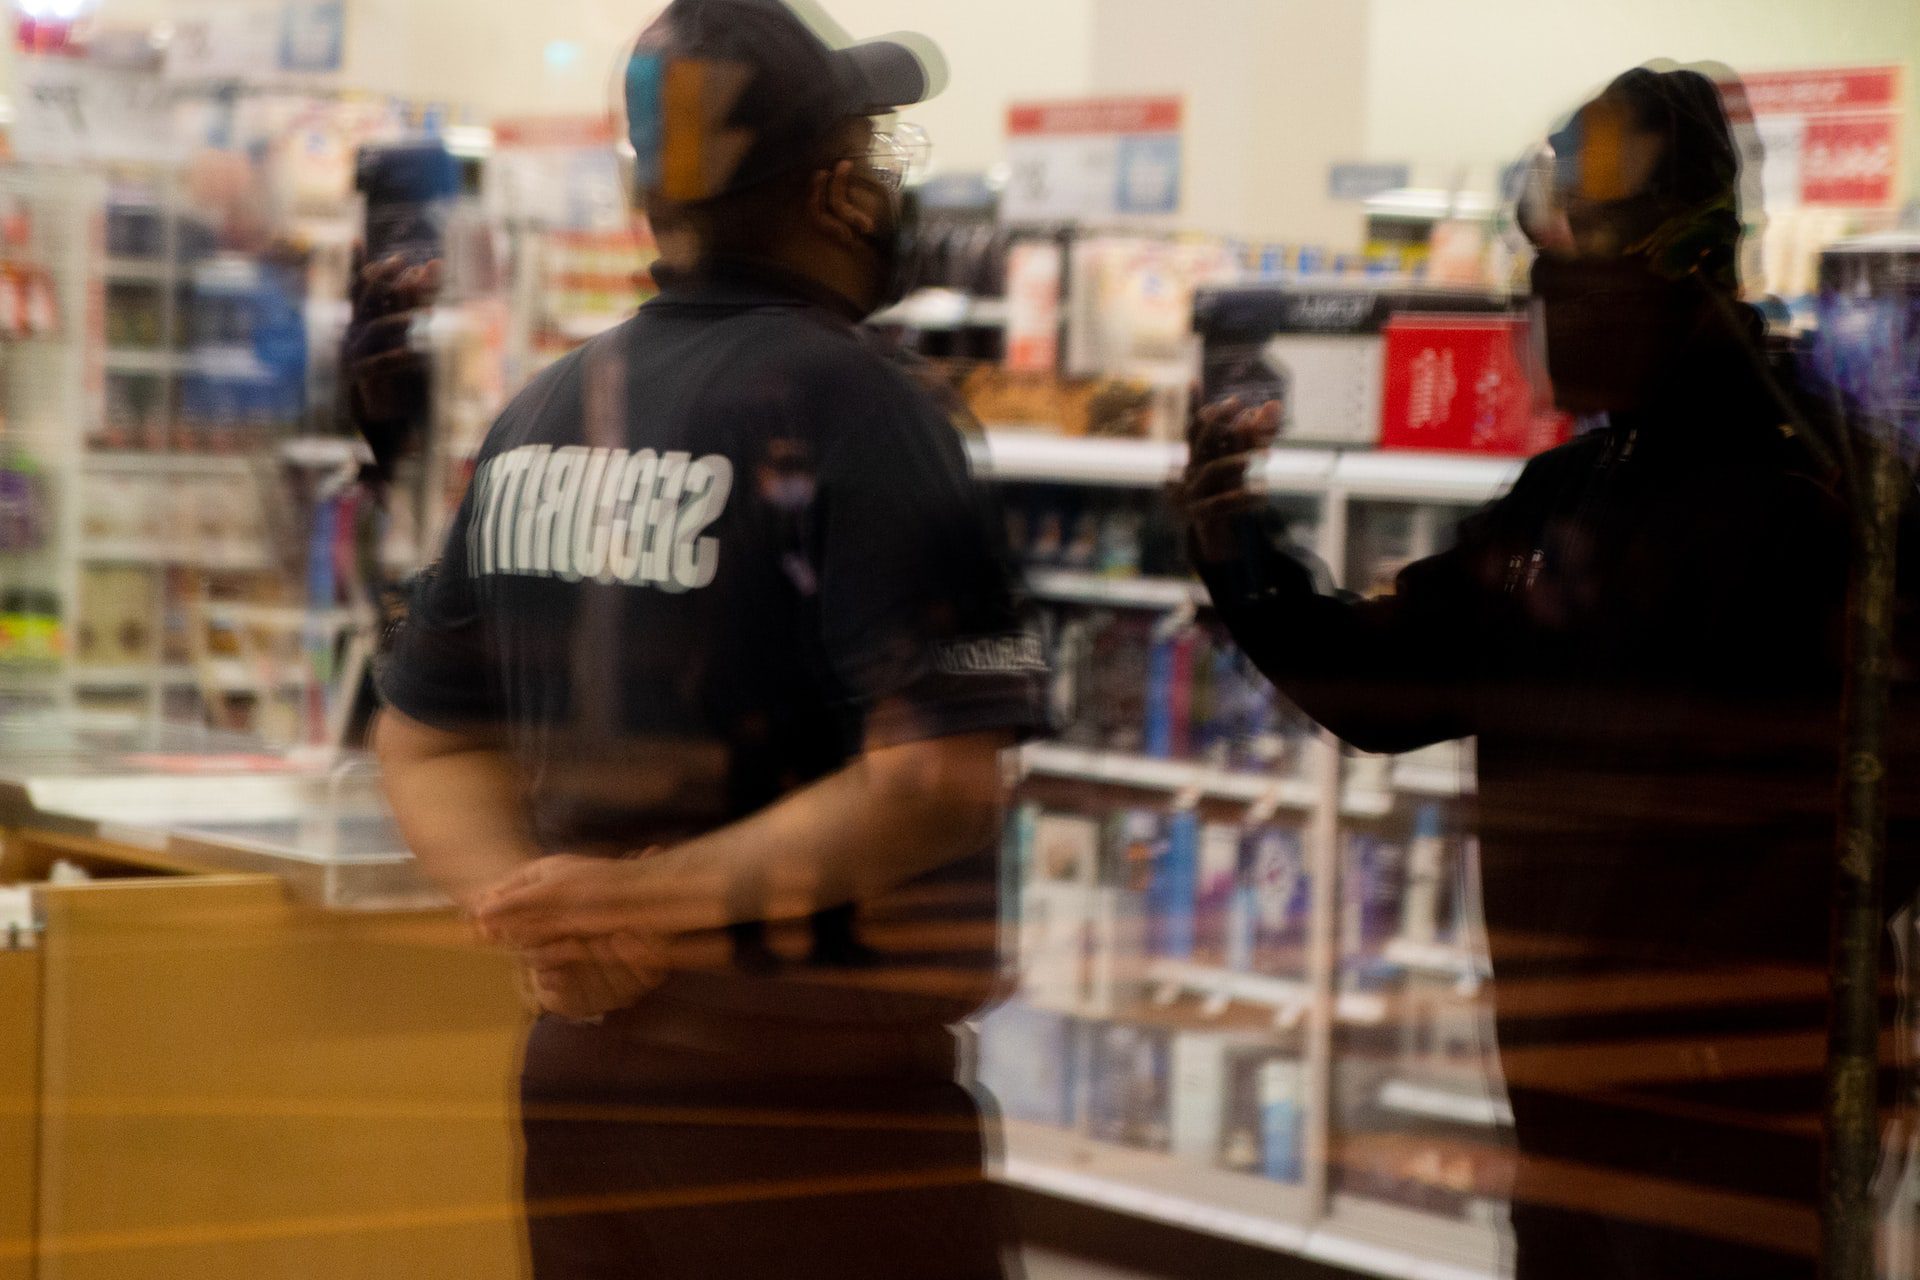 Security guards at a grocery store monitoring for theft risk, a sometimes nonviolent crime charge in California